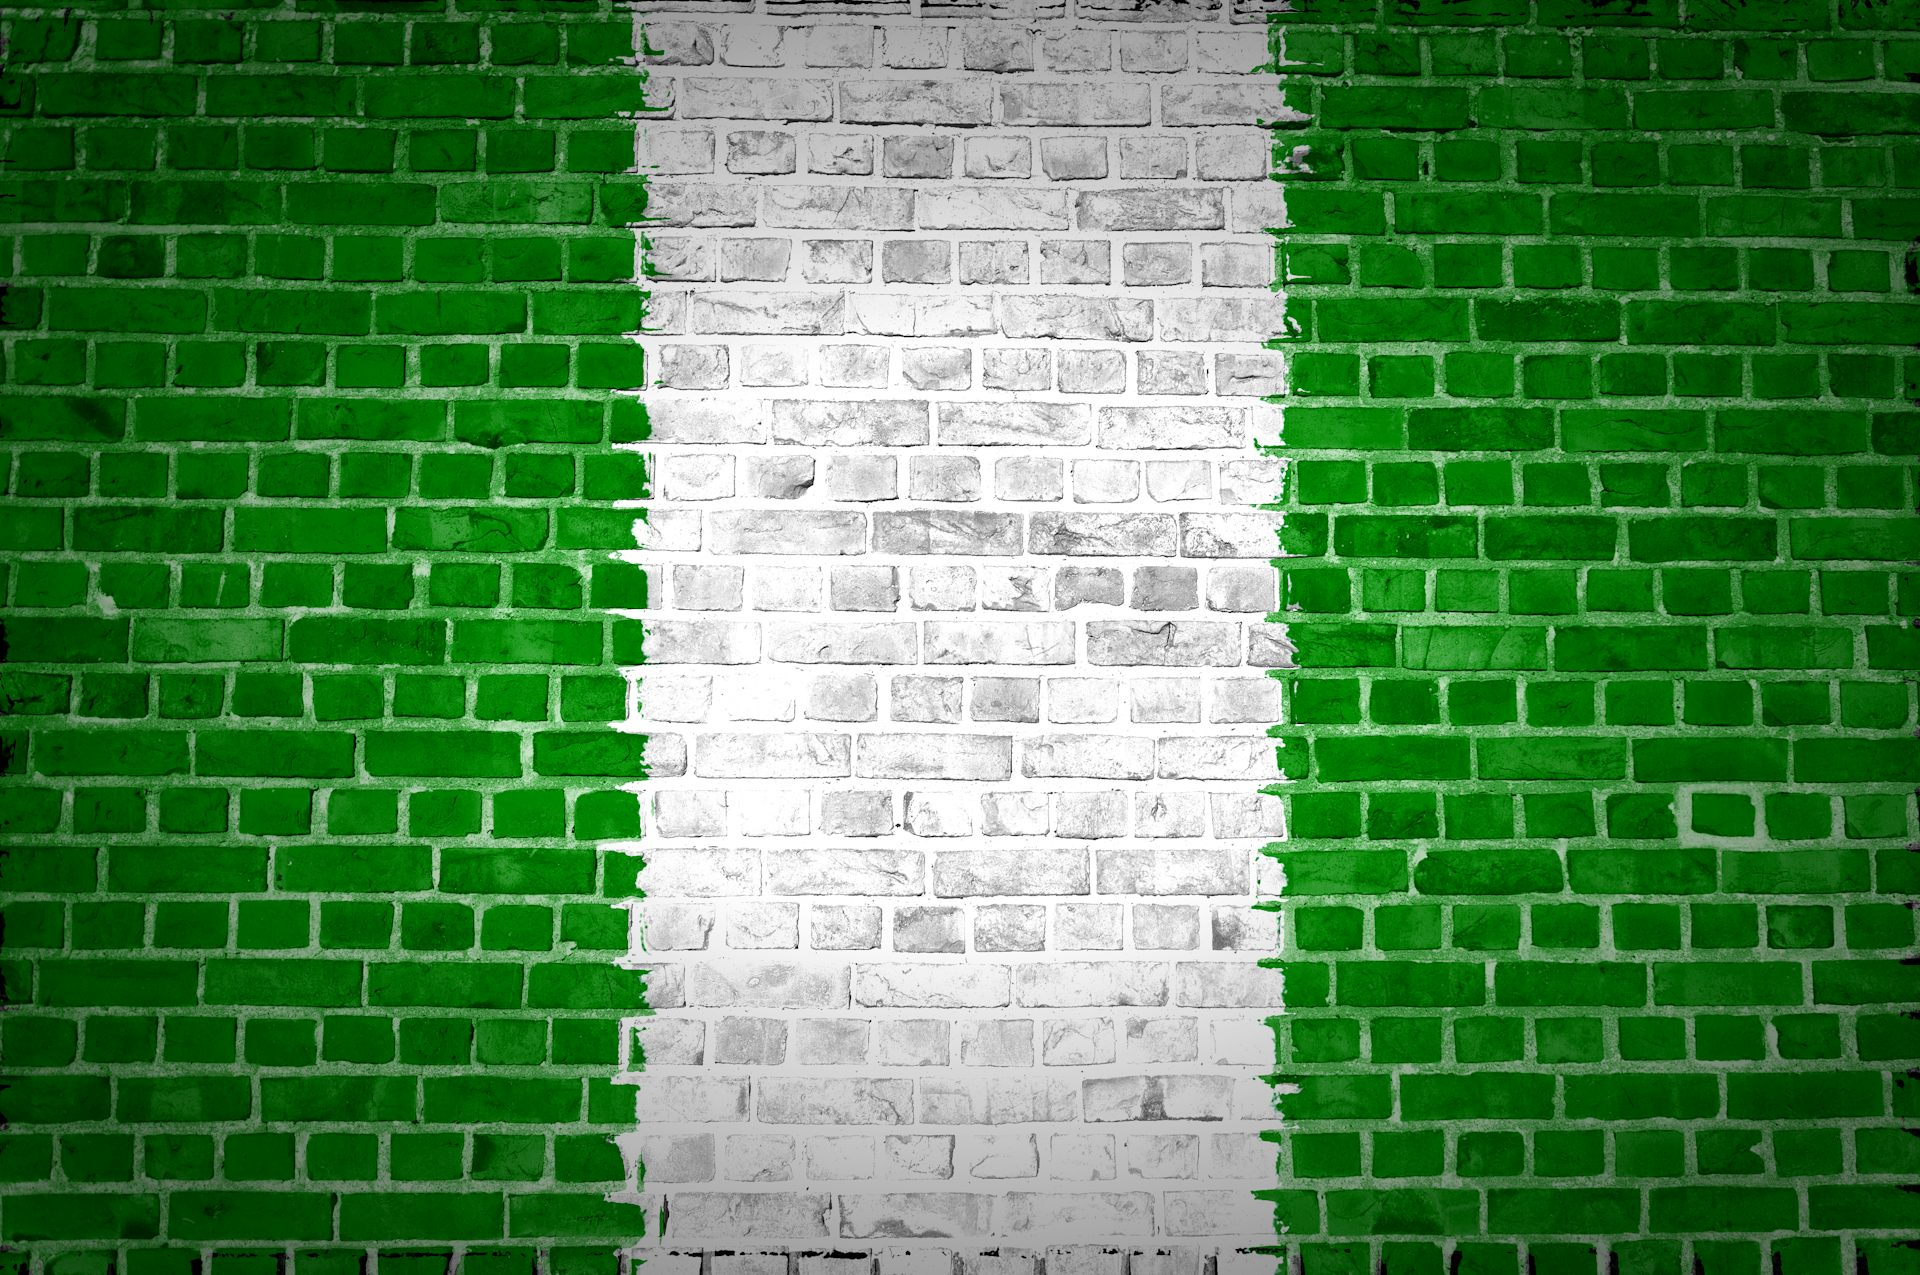 Nigeria’s Federal System Still Isn’t Working: What Should Change